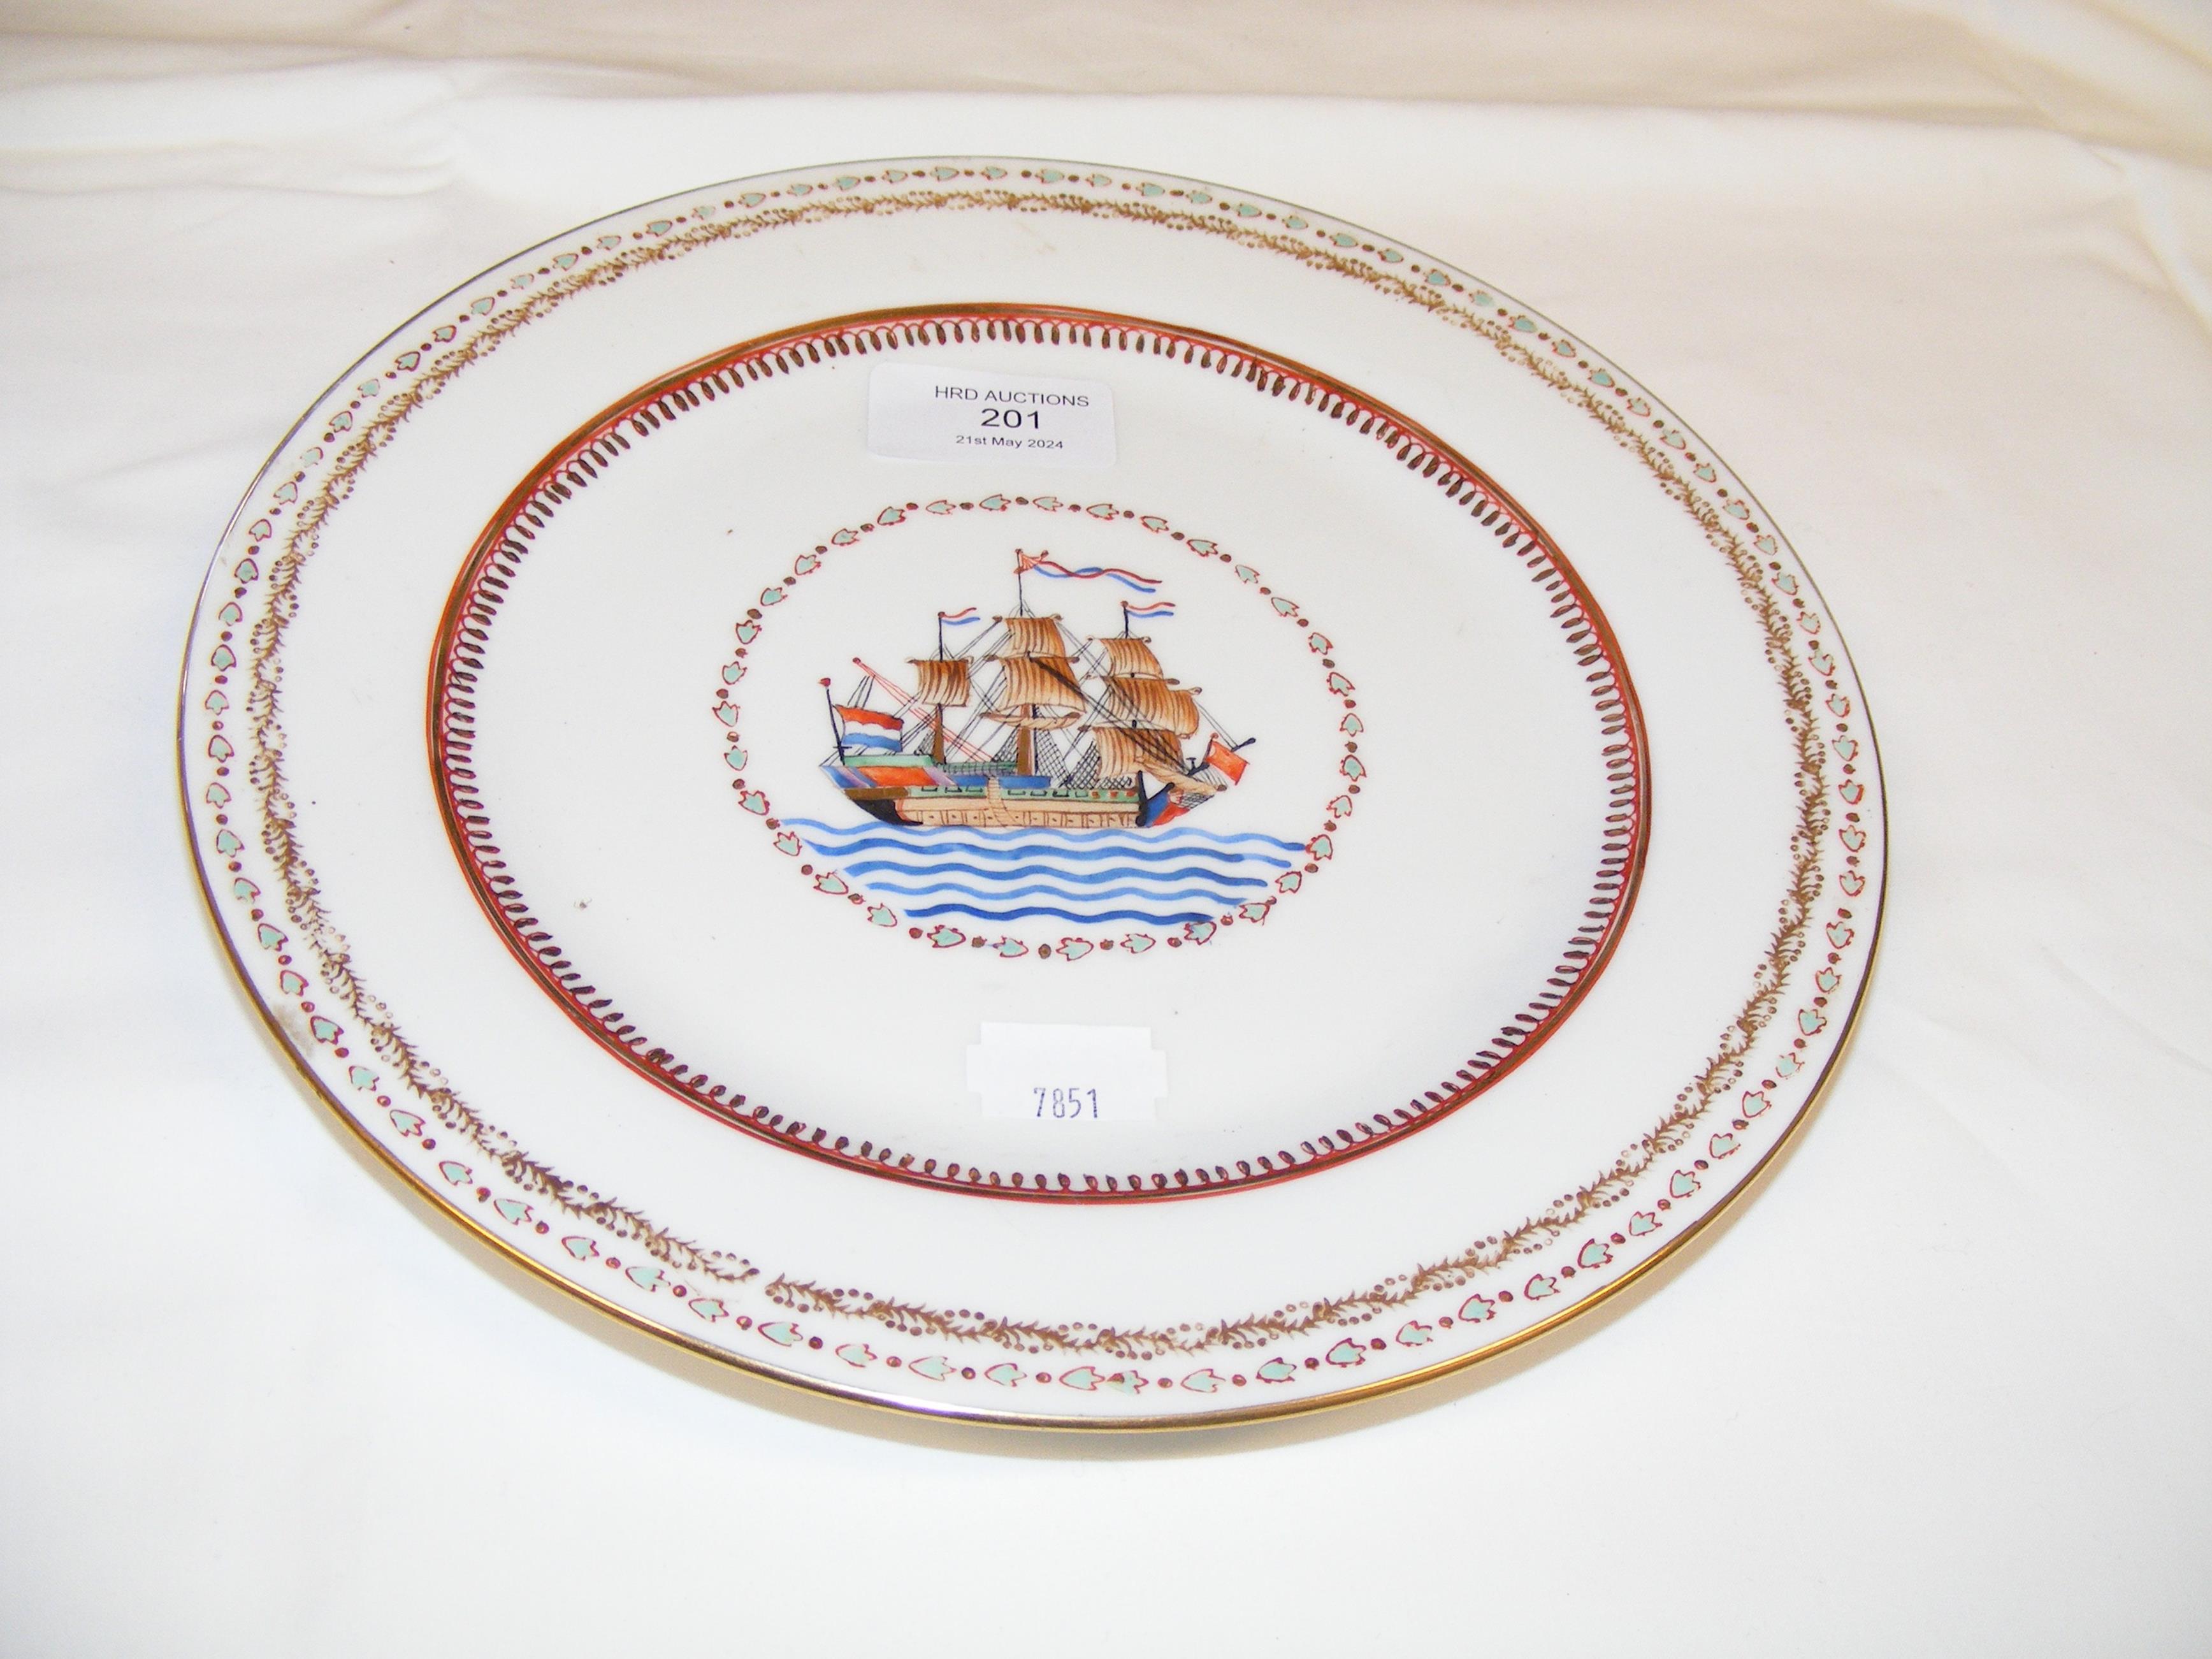 An antique Chinese armorial plate depicting three